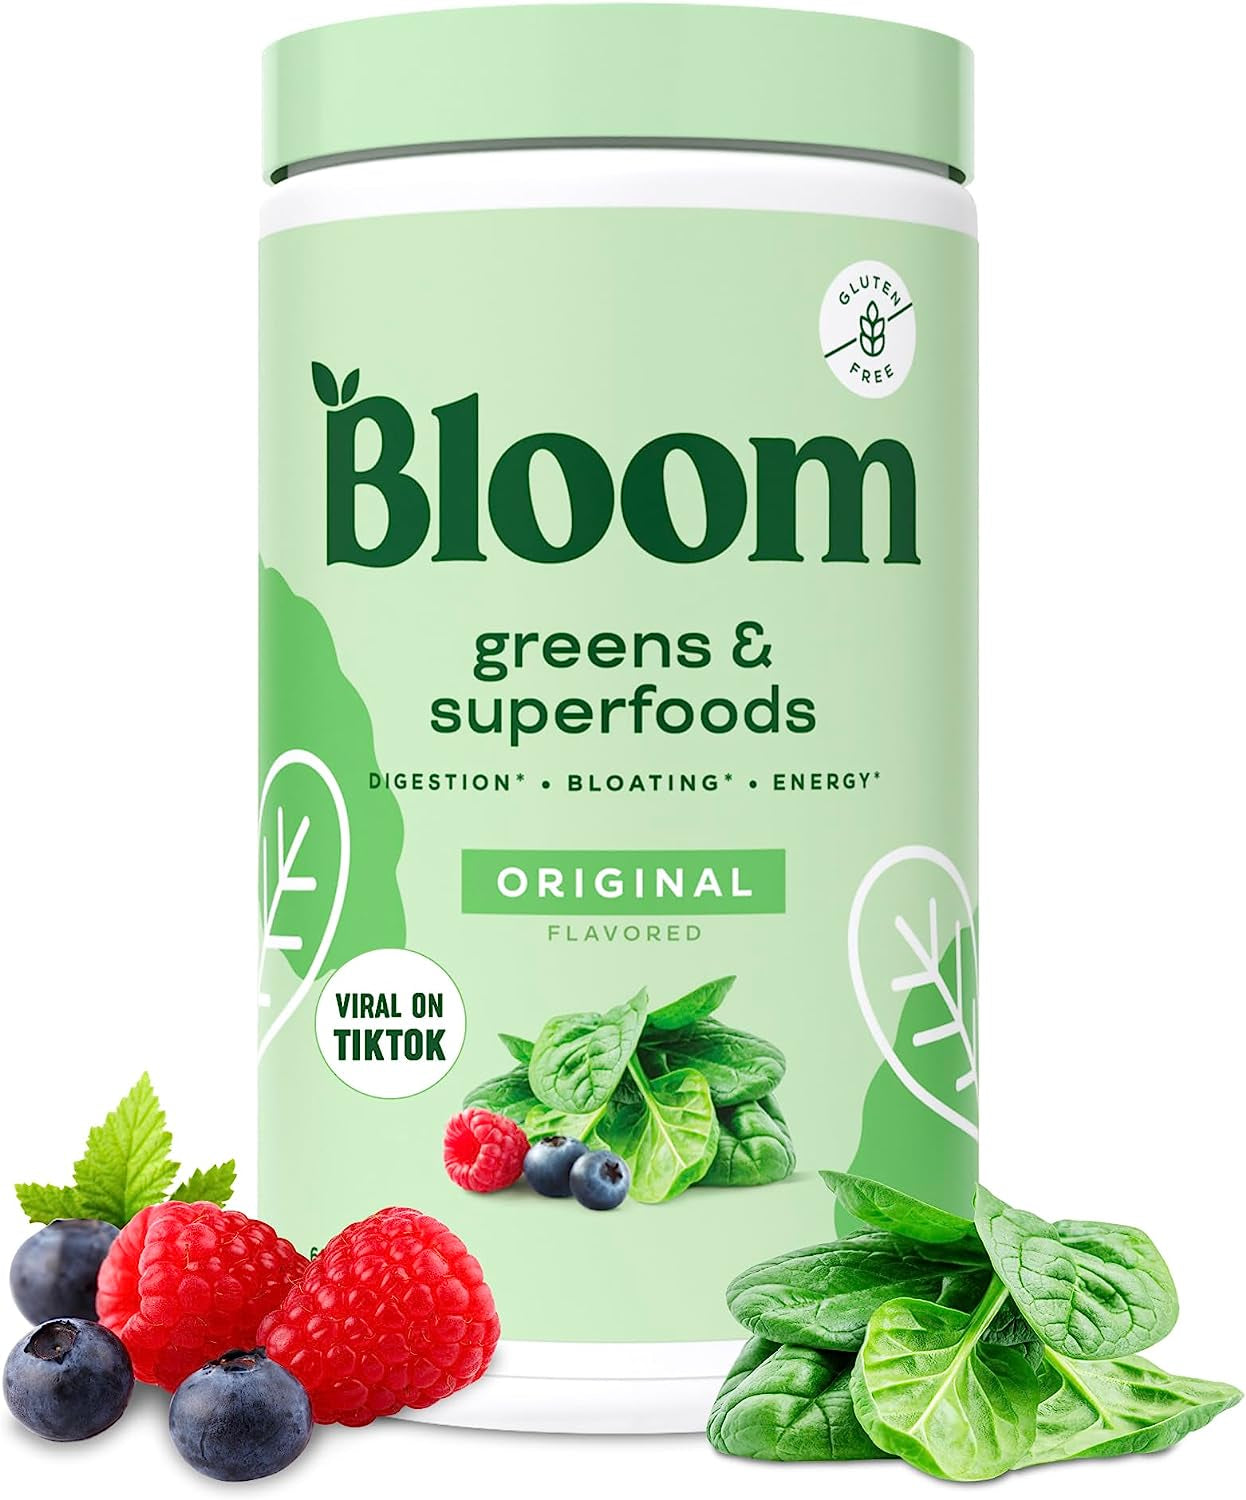 Bloom Nutrition Super Greens Powder Smoothie & Juice Mix - Probiotics for Digestive Health & Bloating Relief for Women, Digestive Enzymes with